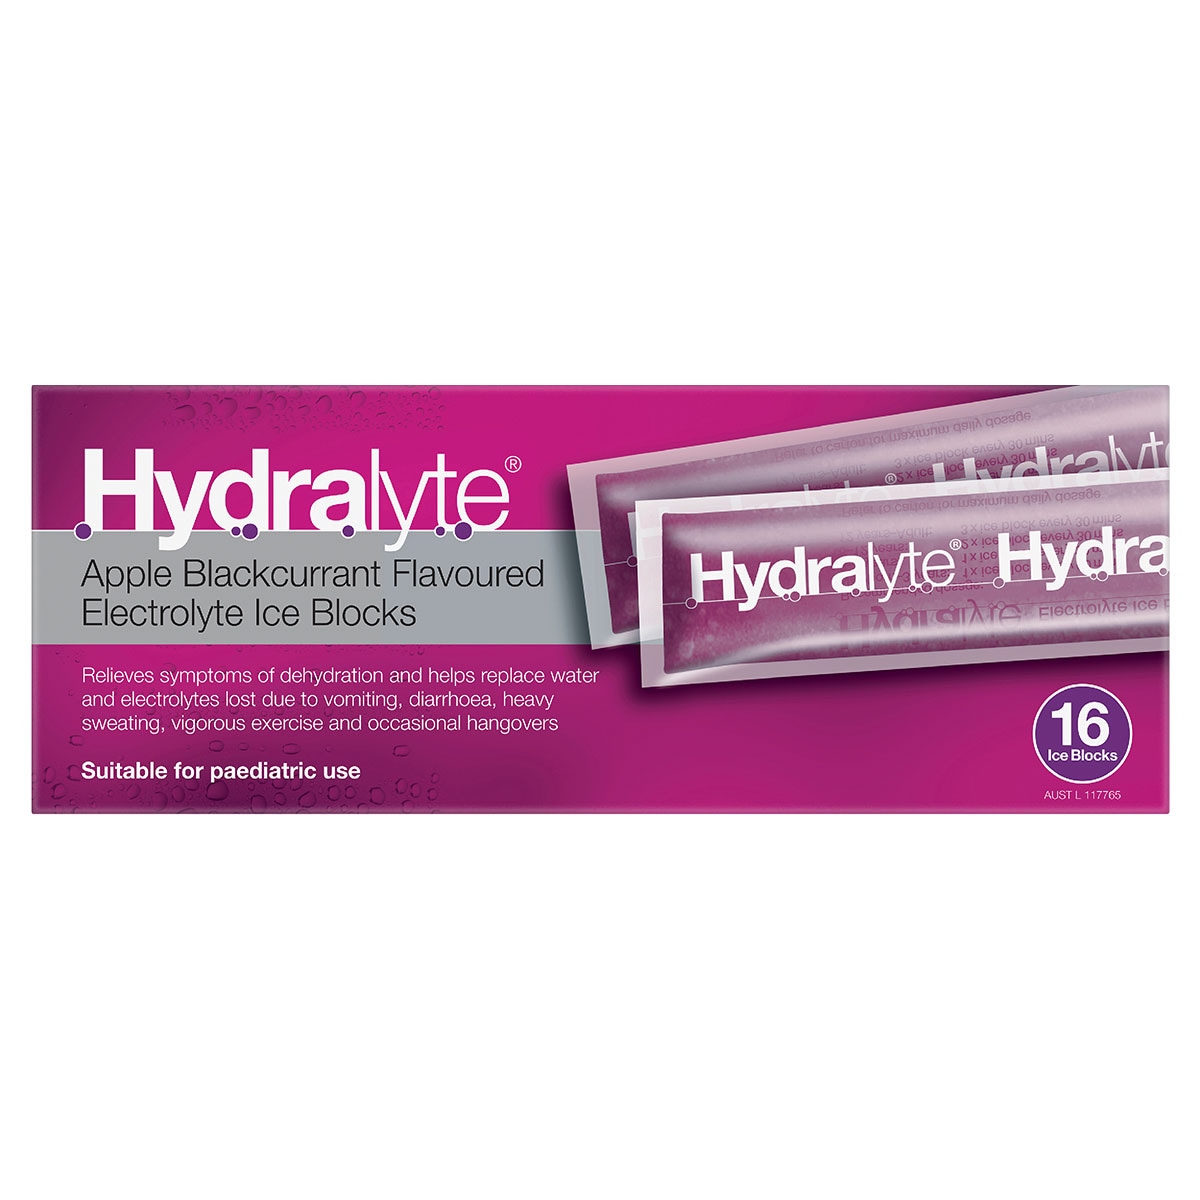 Hydralyte Apple Blackcurrant Flavour Electrolyte Ice Blocks 16 Pack